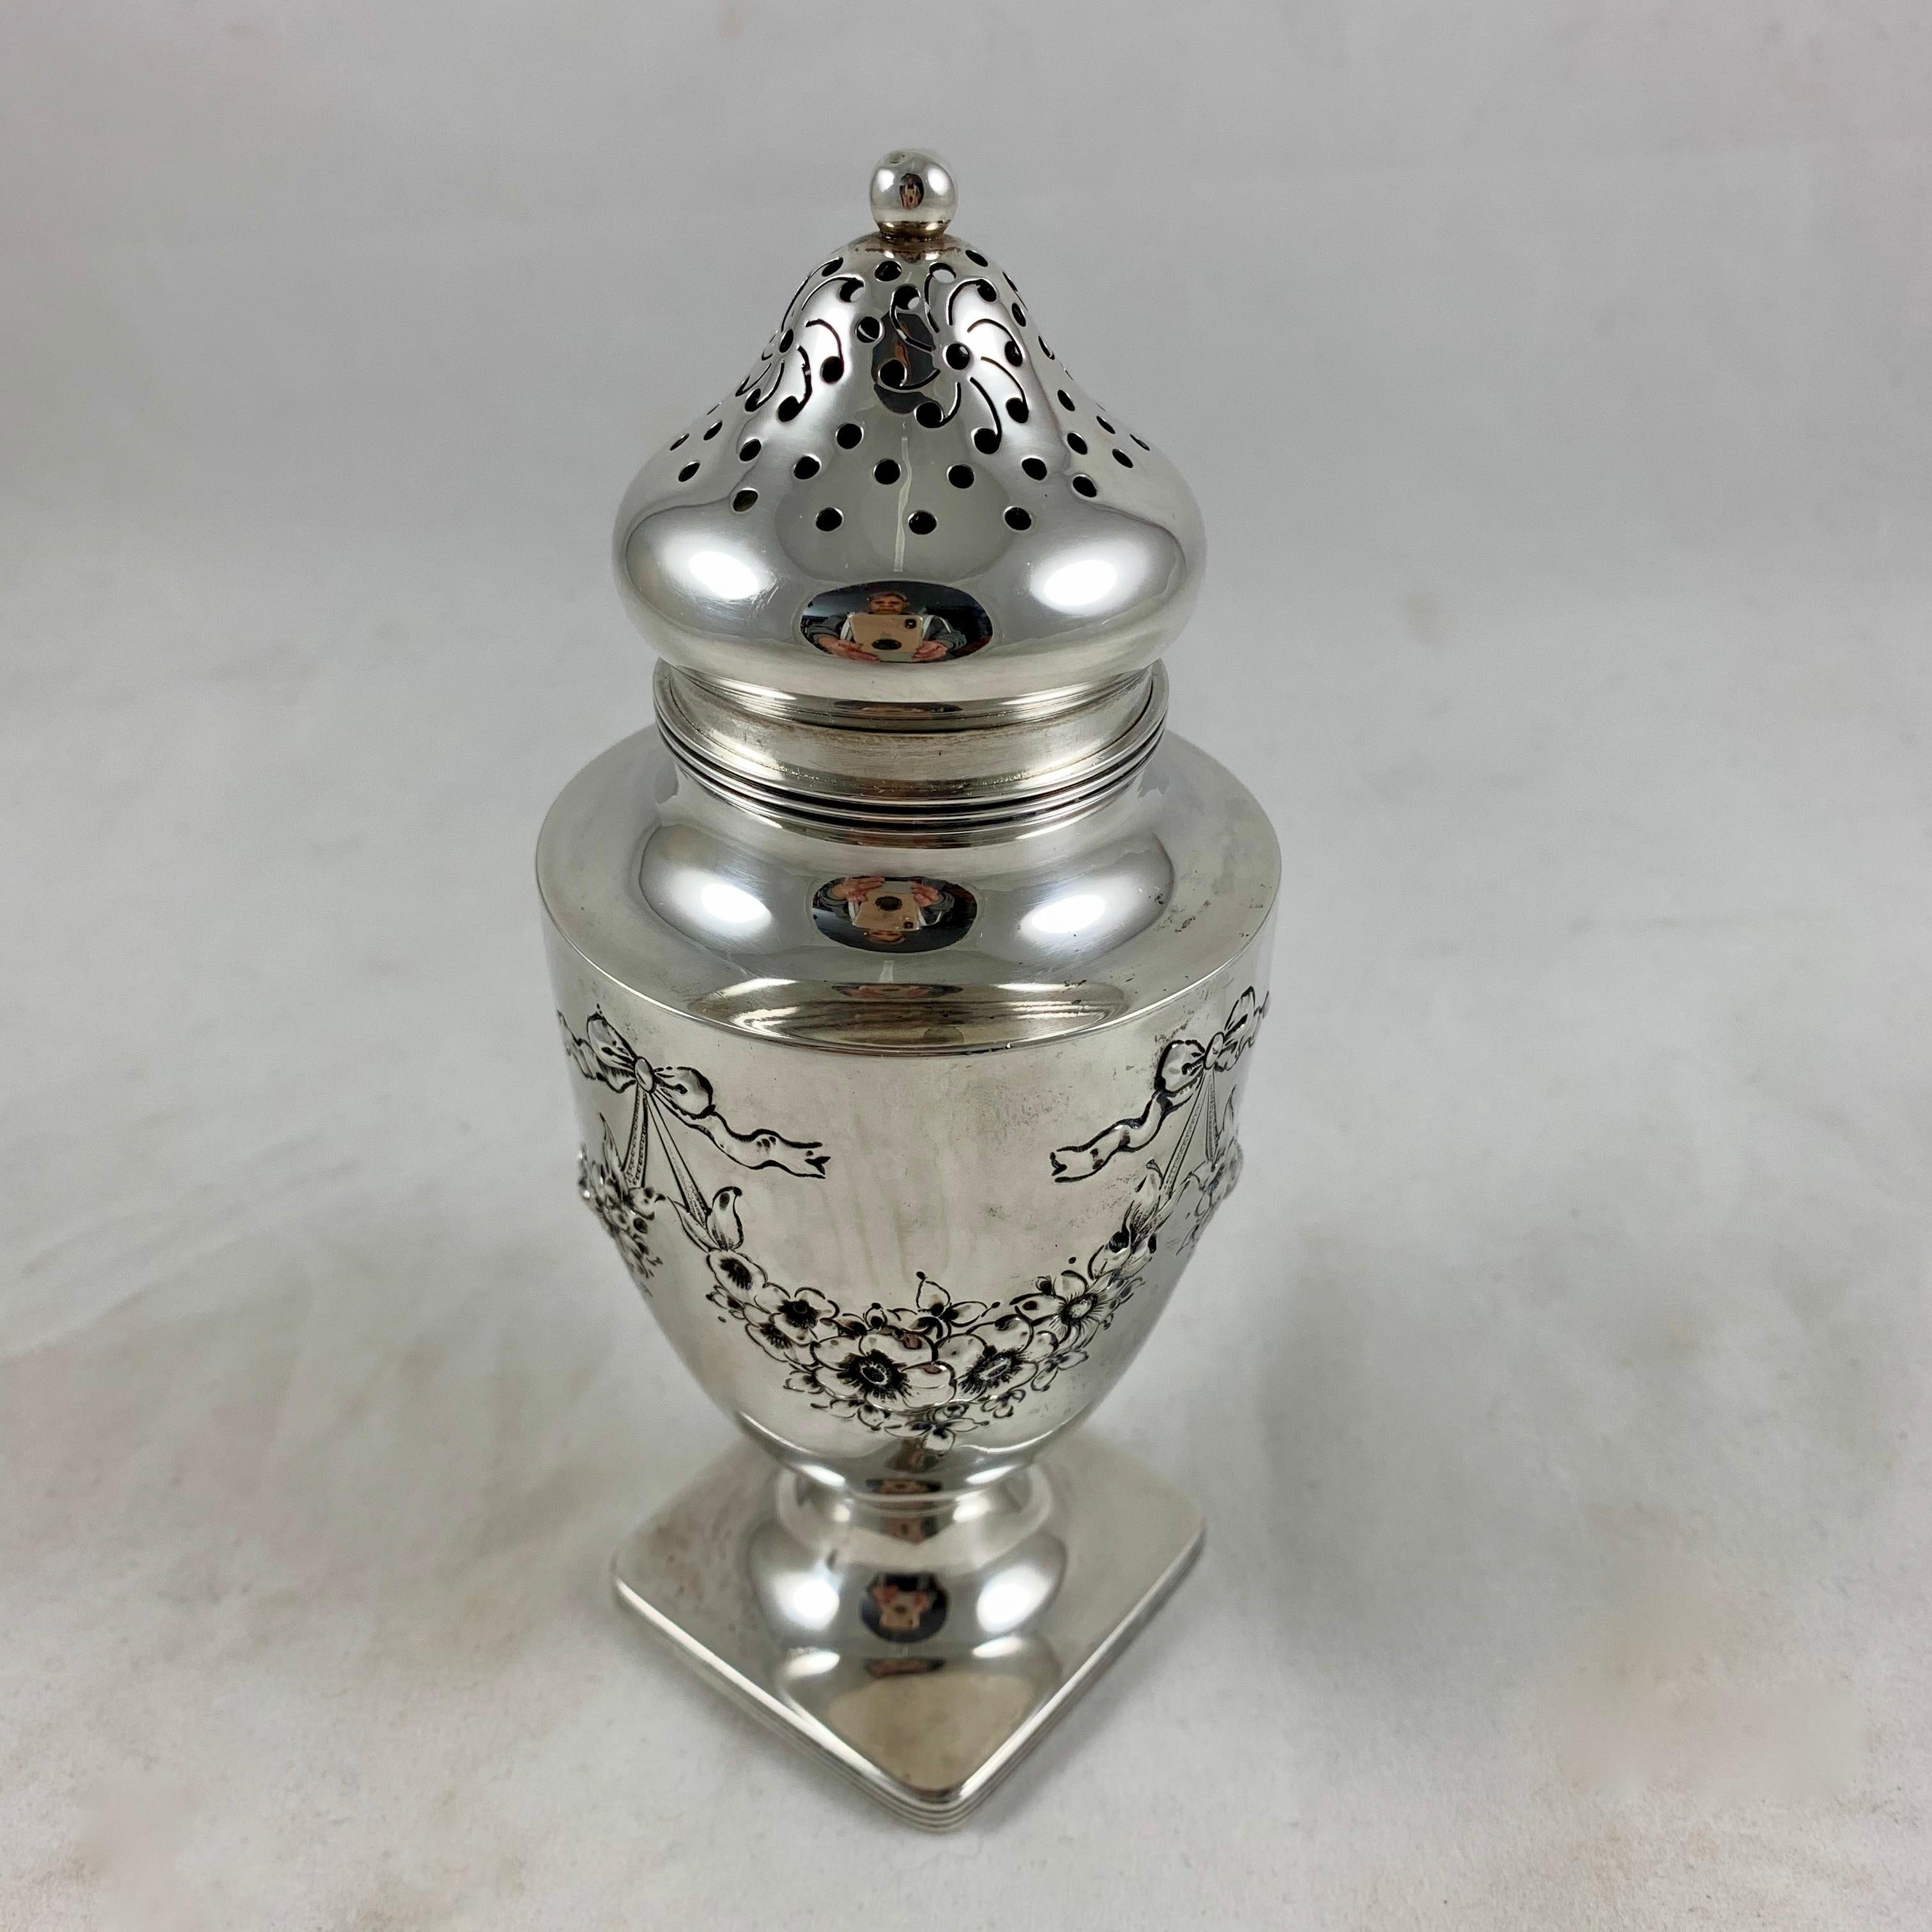 American Classical 19th Century American Lebkuechar & Co. Sterling Silver Floral & Bow Sugar Caster